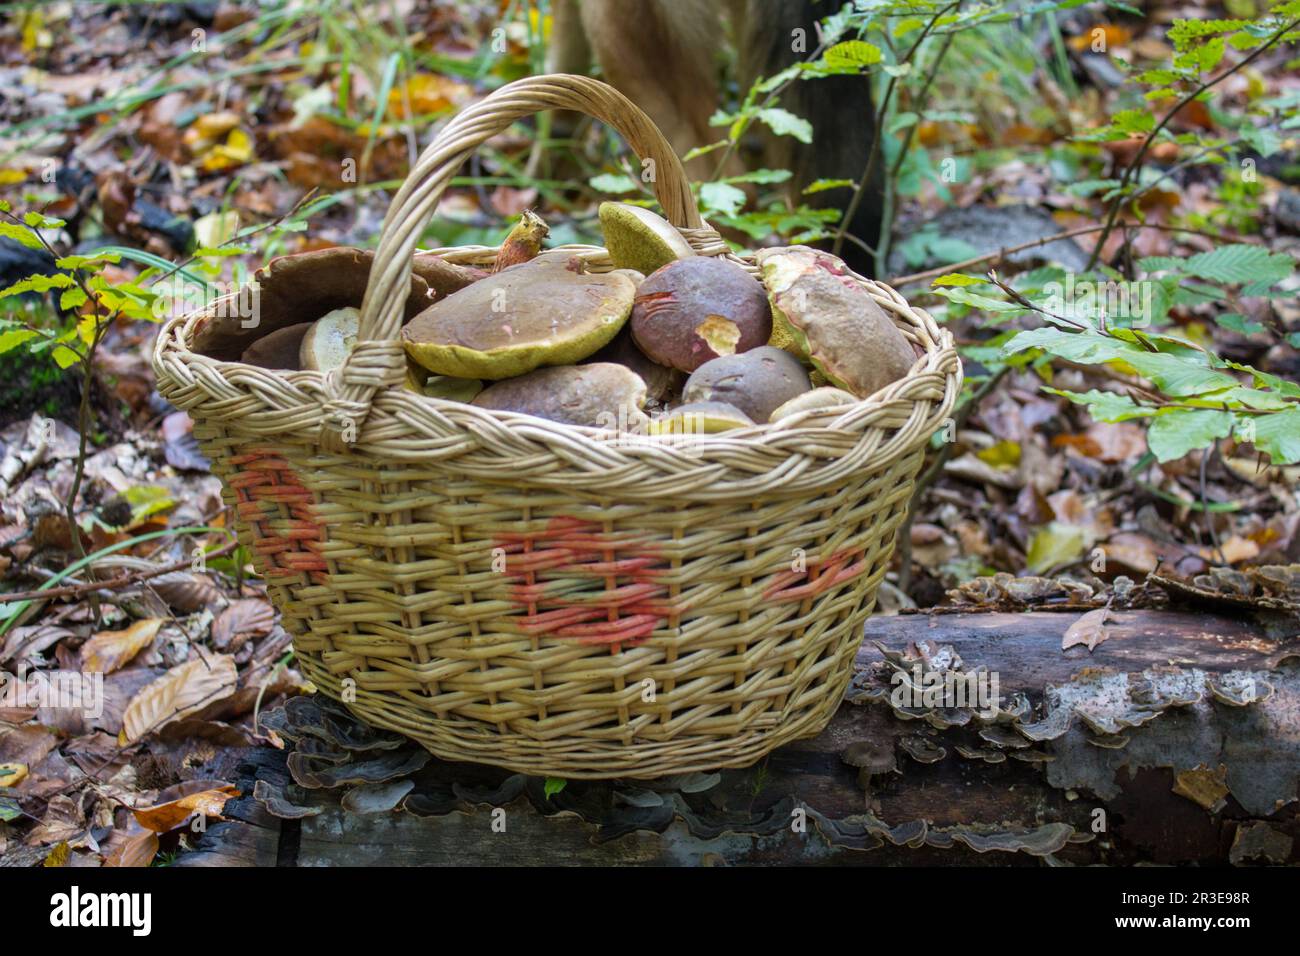 A full basket of mushrooms was collected in the woods Stock Photo